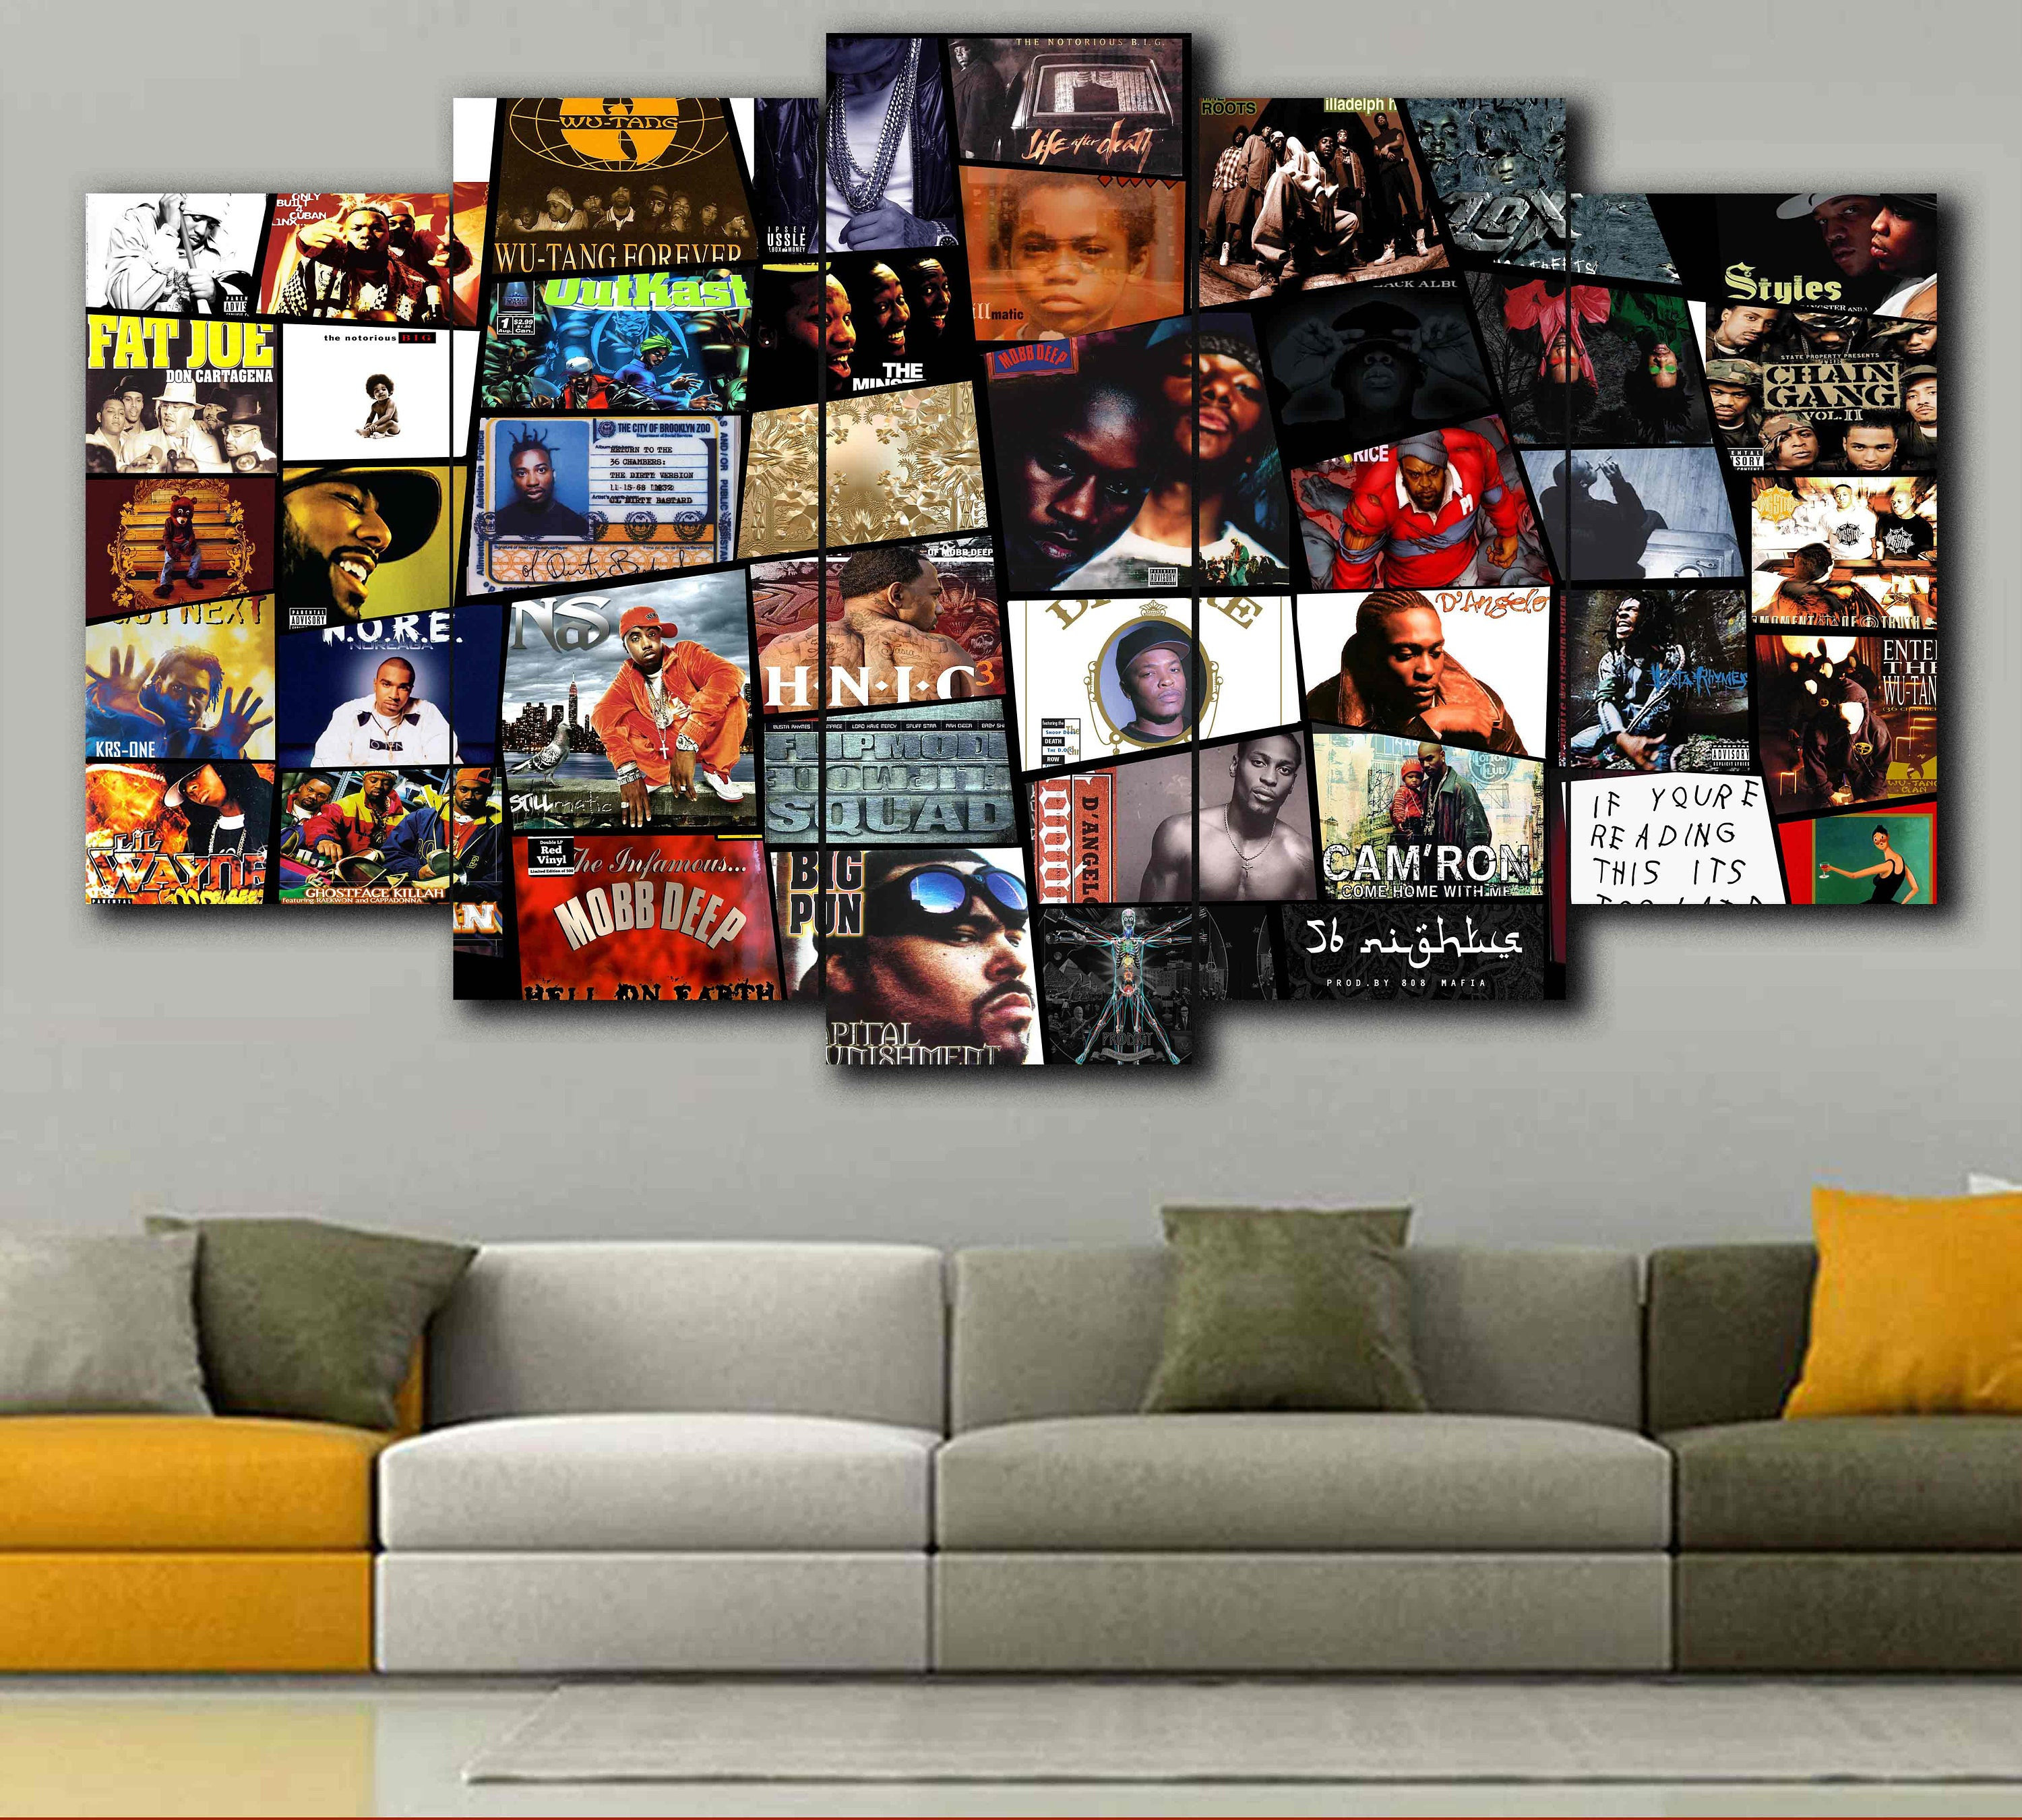 The Predator Ice Cube Rap Music Album Cover Poster Print Art Canvas  Painting Wall Living Room Home Decor (No Frame)